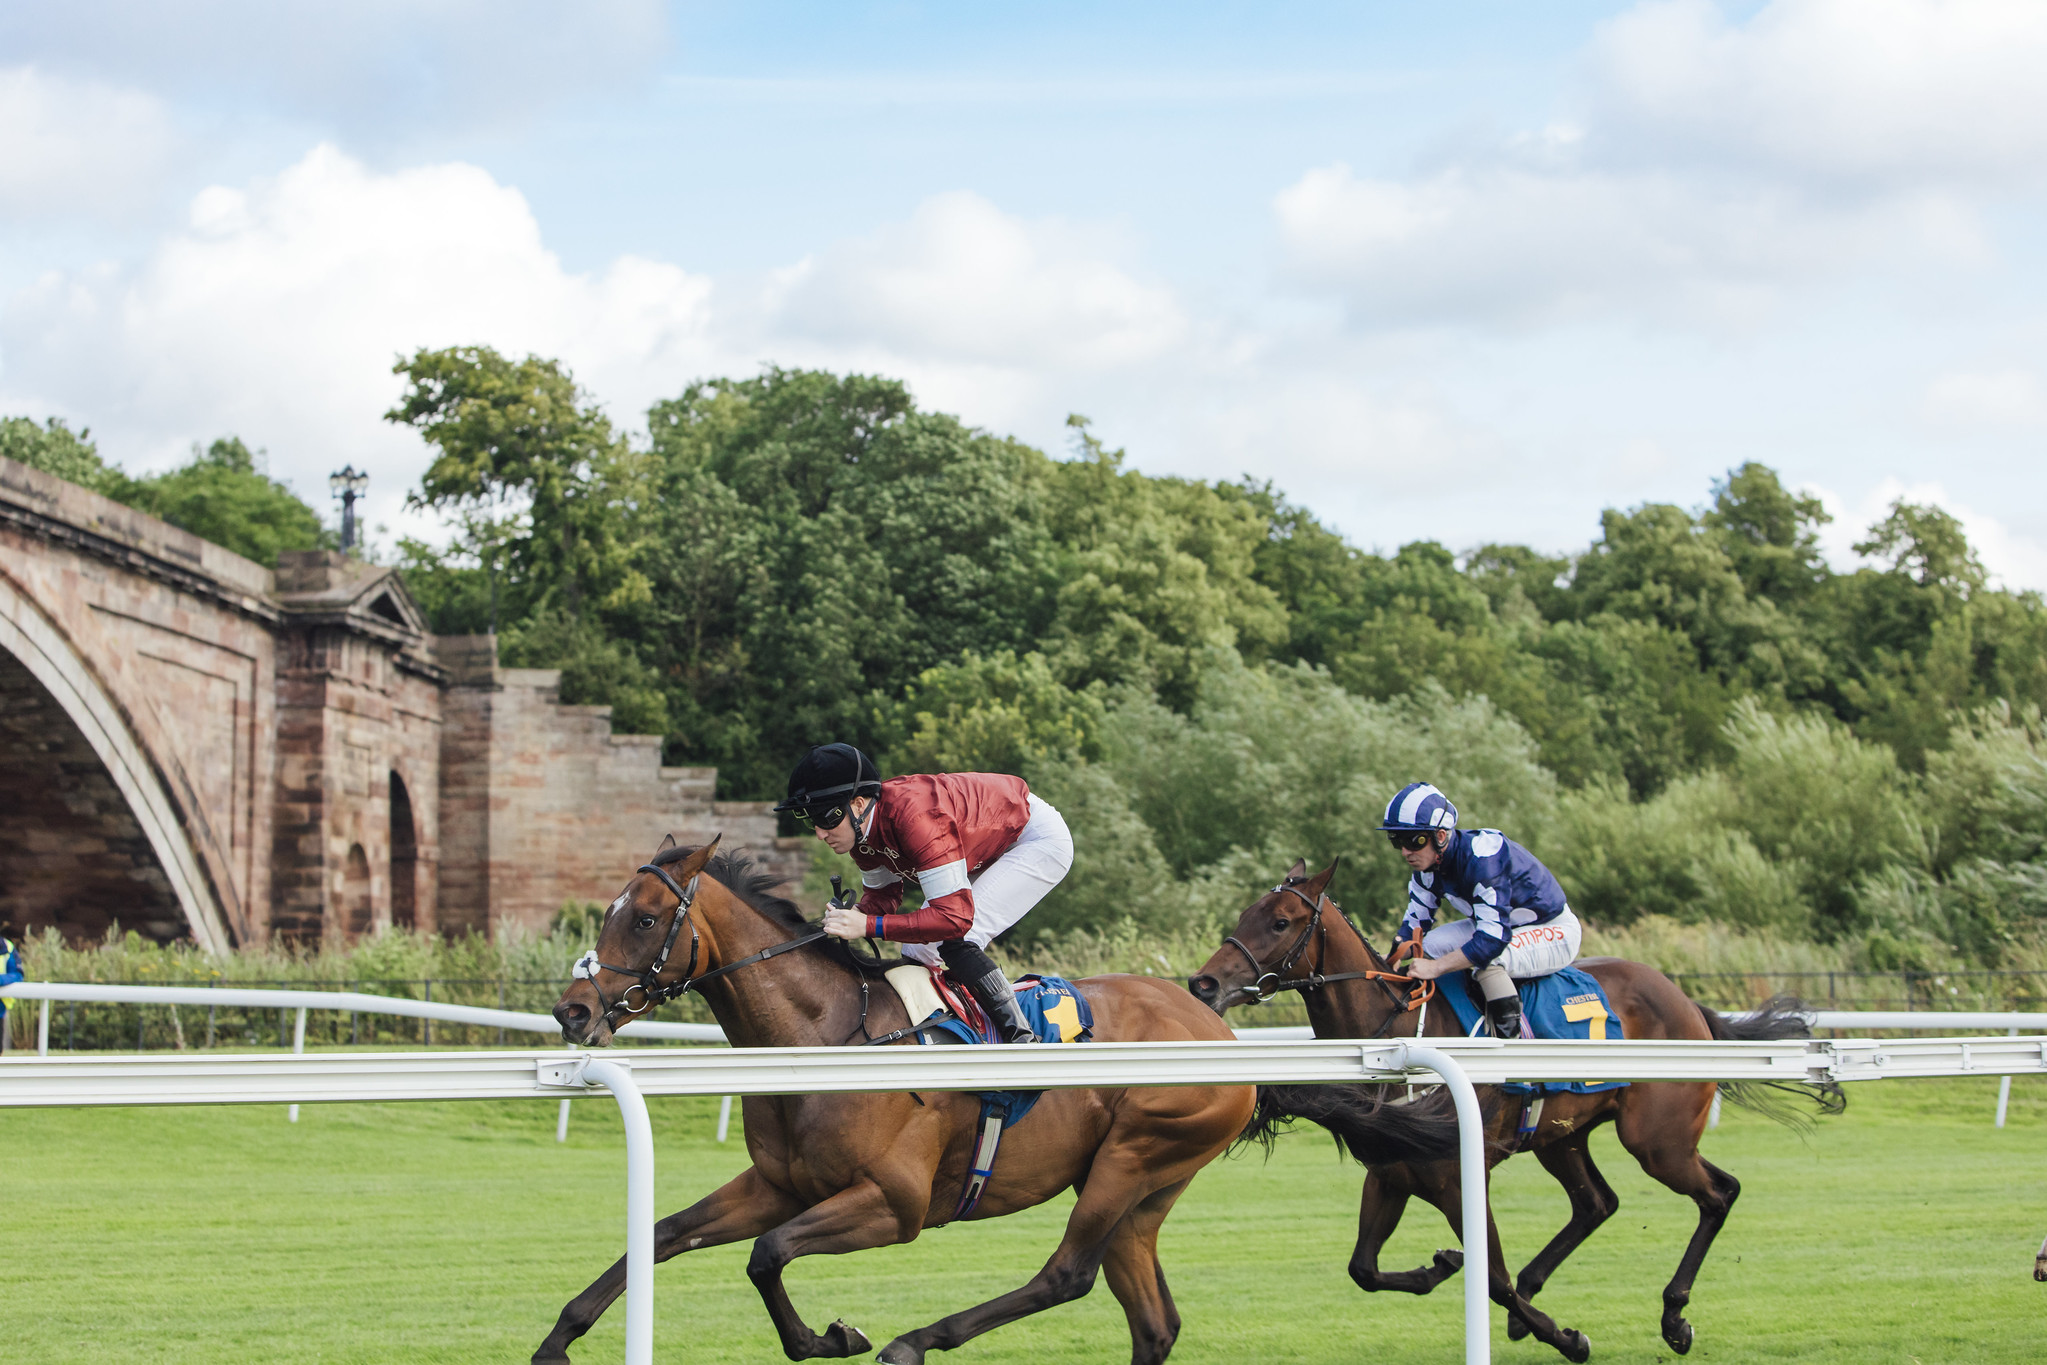 Tickets On Sale For The Return Of Racing At Chester - Latest News - Chester Racecourse